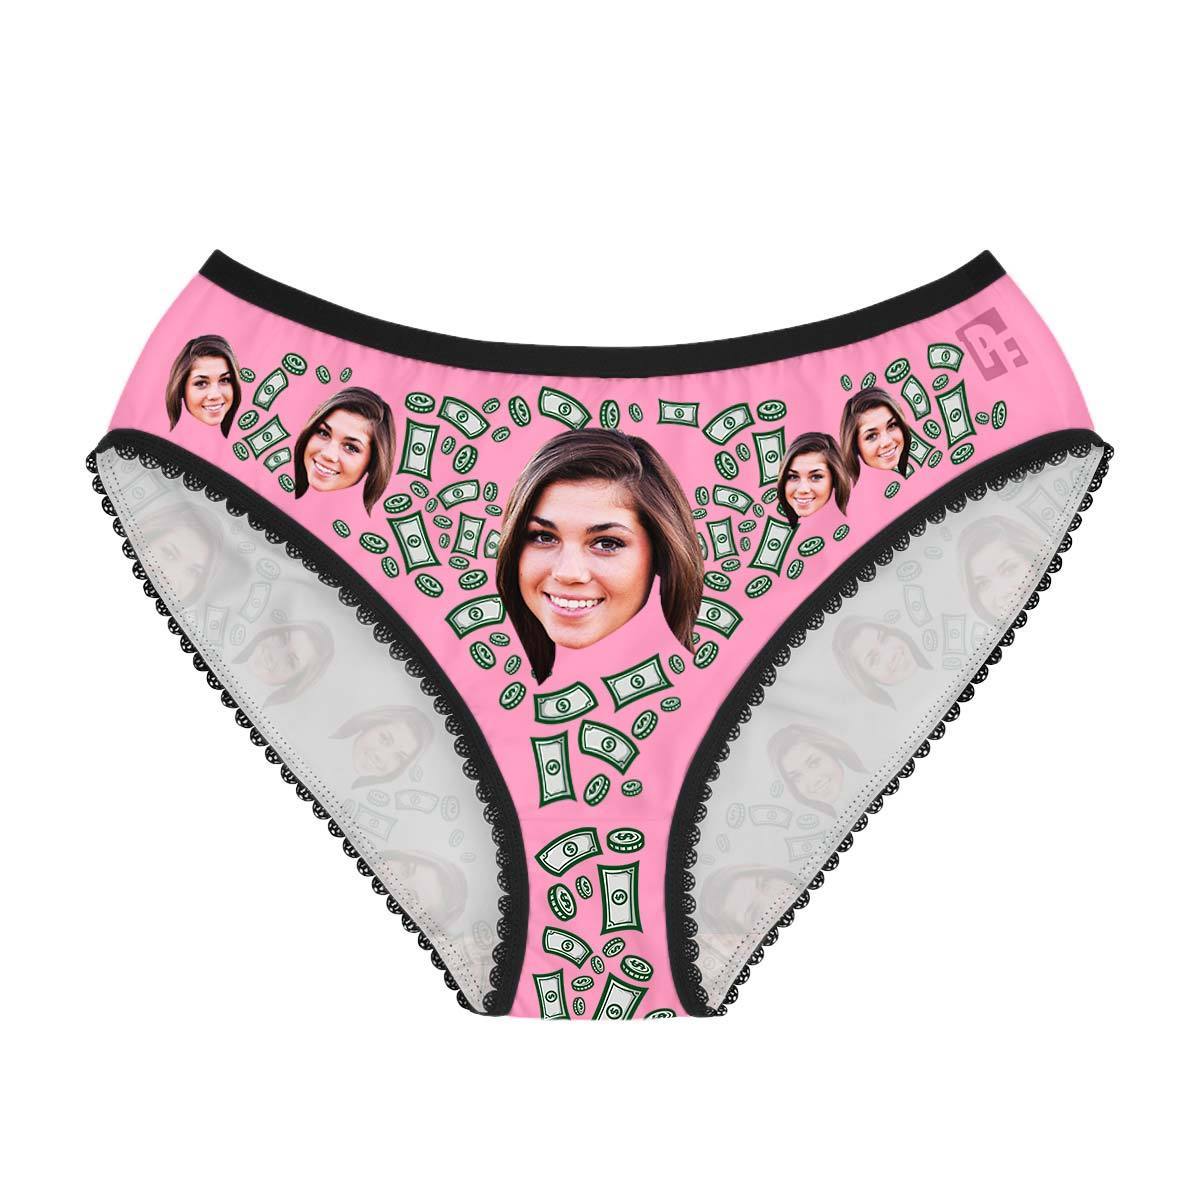 Pink Money women's underwear briefs personalized with photo printed on them